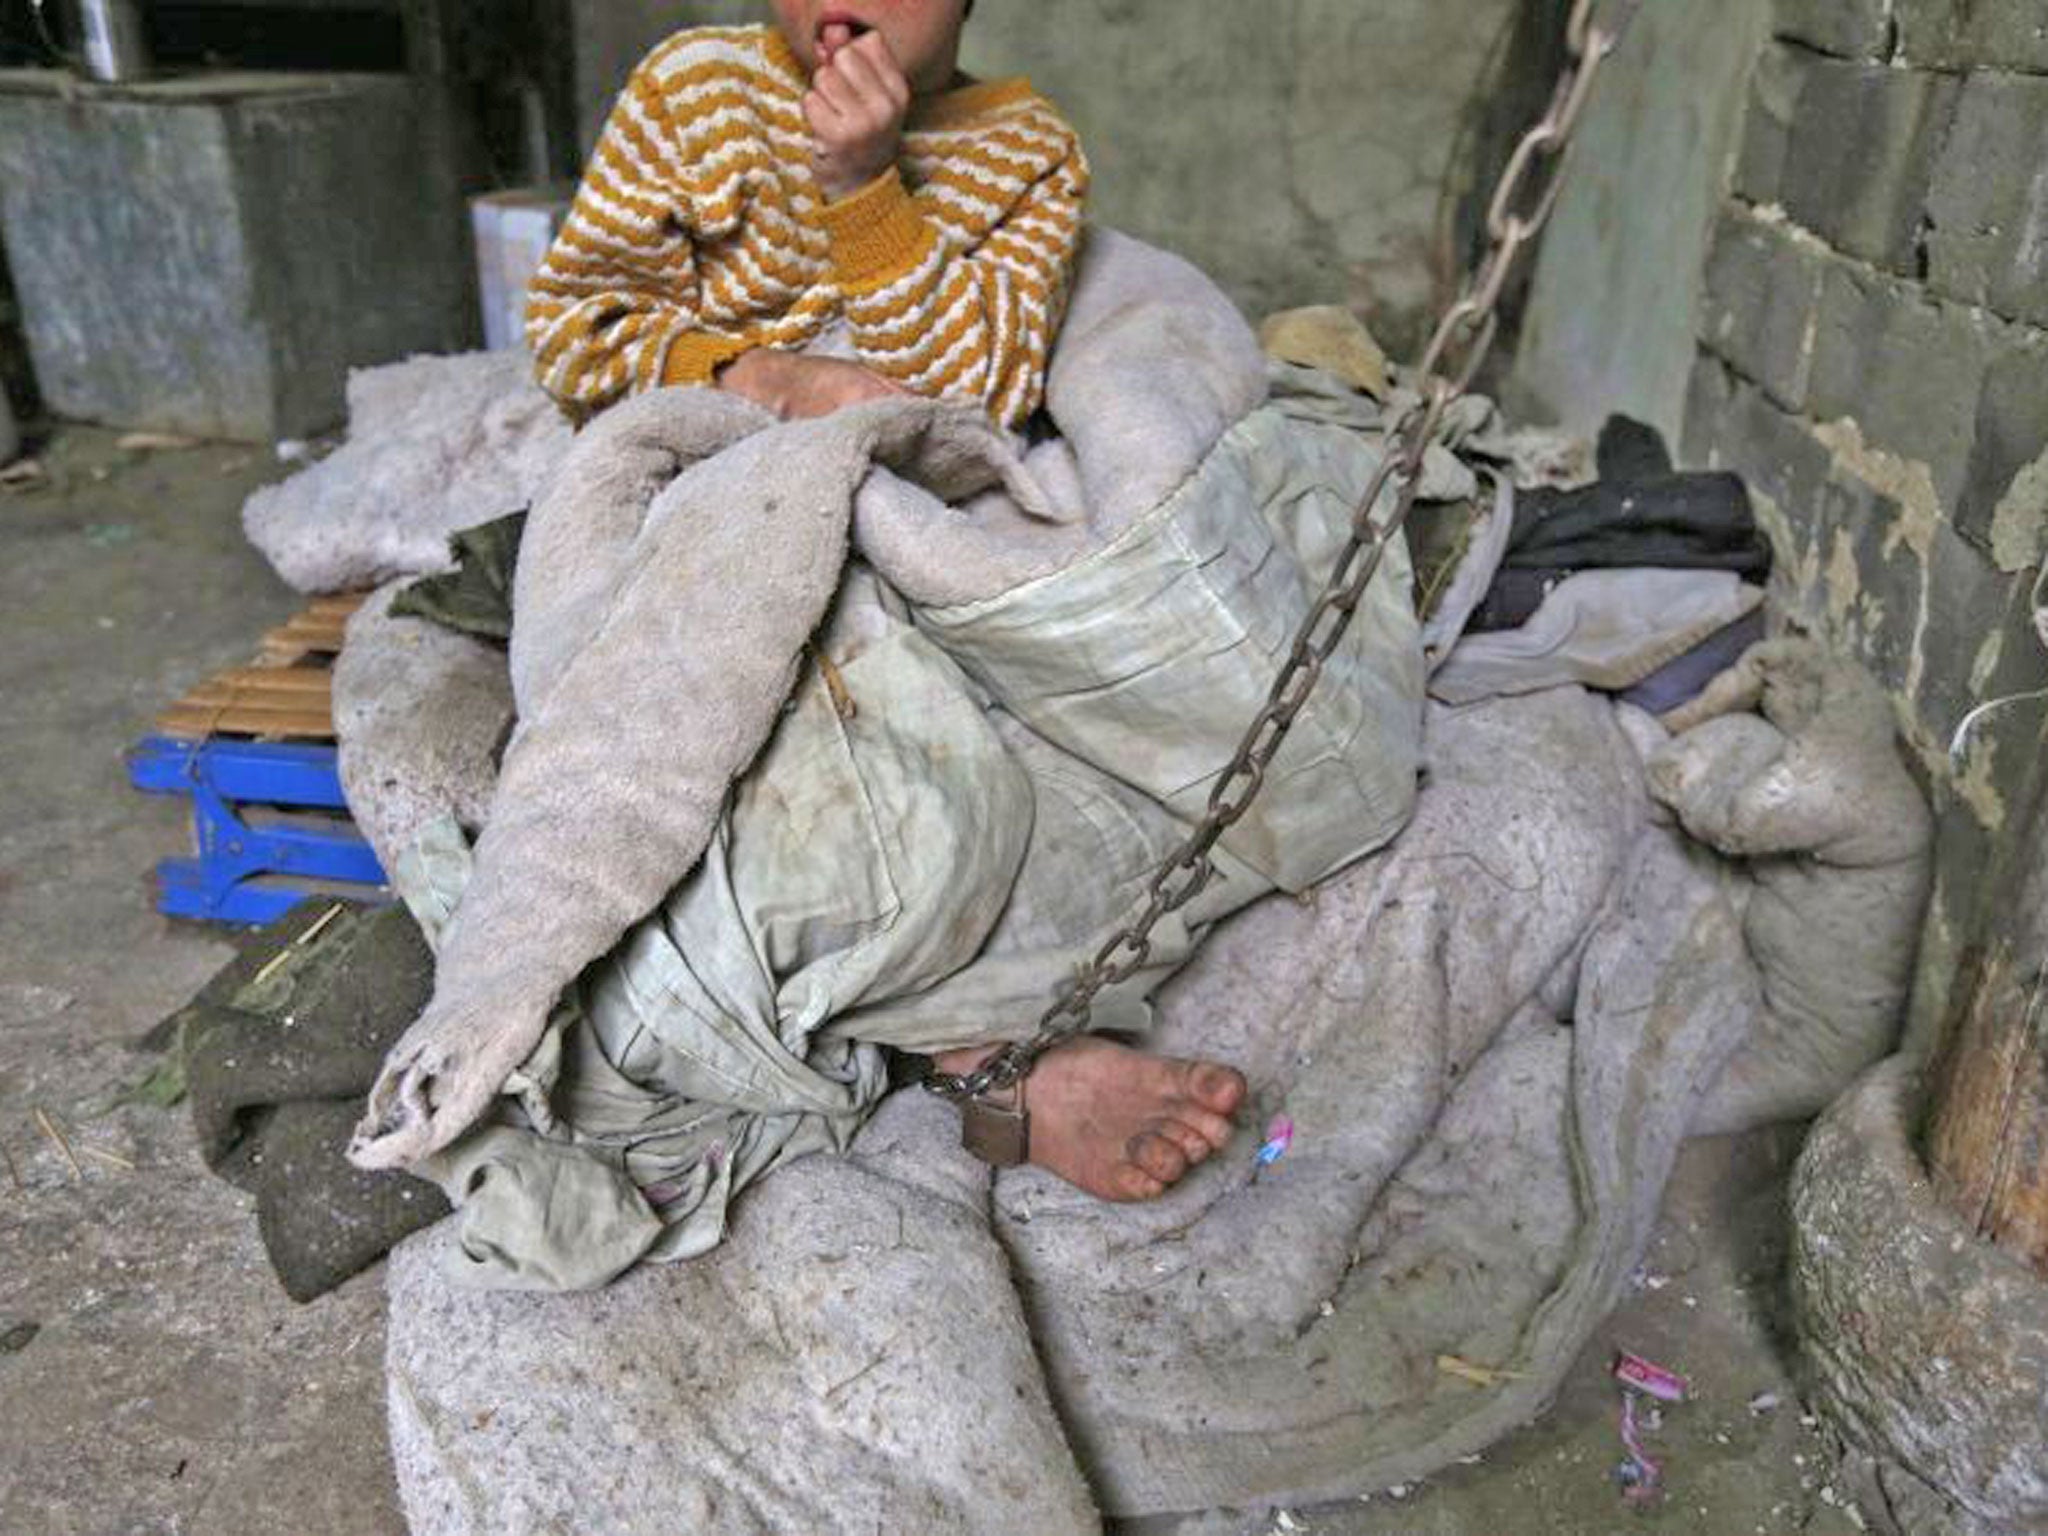 Eleven-year-old He Zili sits as he is chained to a pillar at his home in Zhejiang province